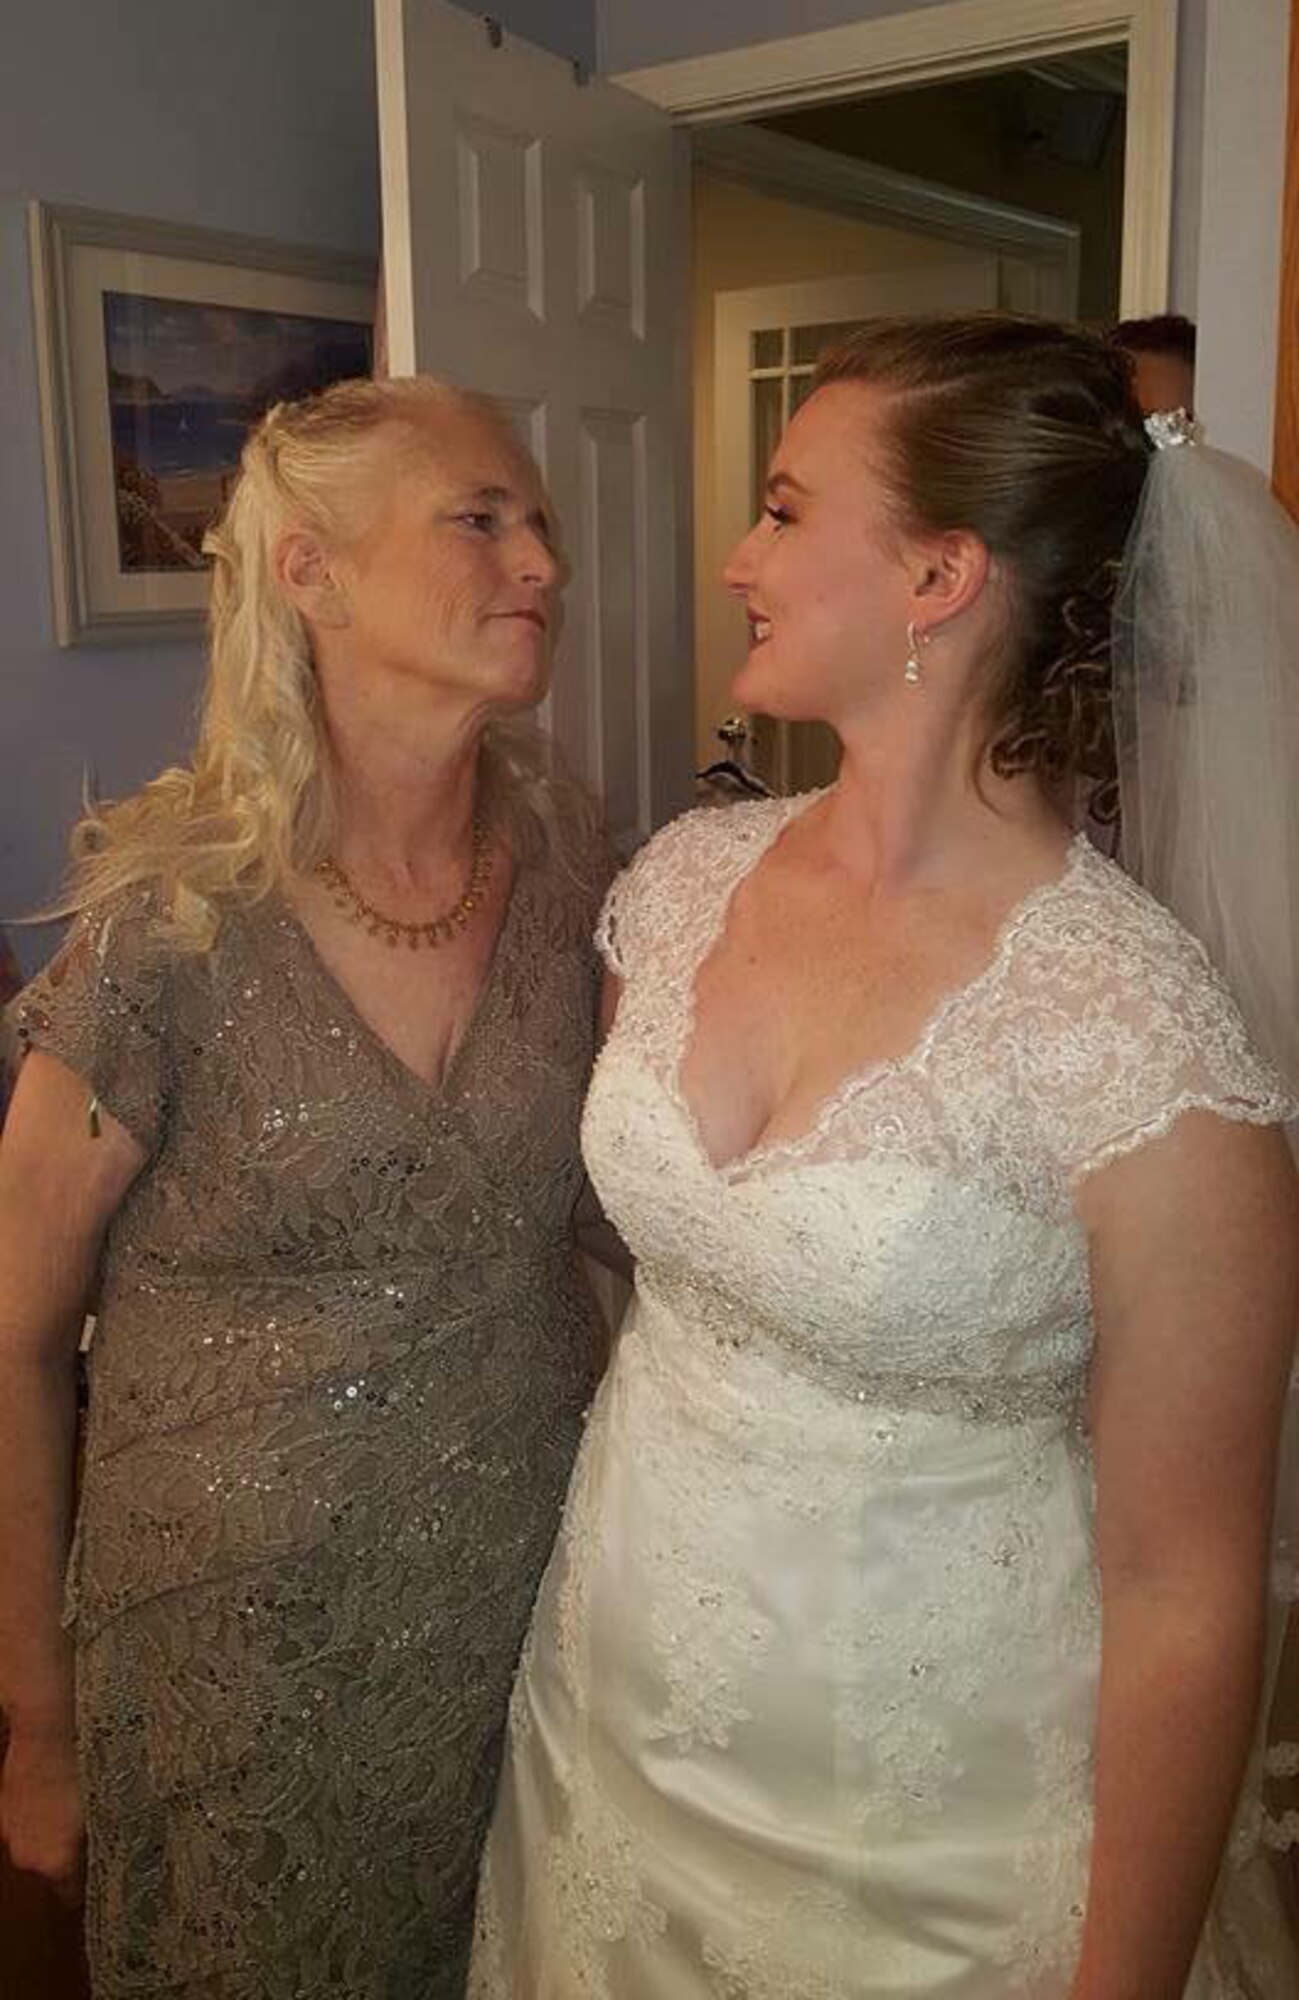 Mary Nevins and her daughter, Denise, share a smile on Denise’s wedding day in Foley, Minn., Sept. 17, 2016. Mary’s daughter, now Senior Airman Denise Jenson, currently works at the 28th Bomb Wing Public Affairs office at Ellsworth Air Force Base, S.D. (Courtesy photo)